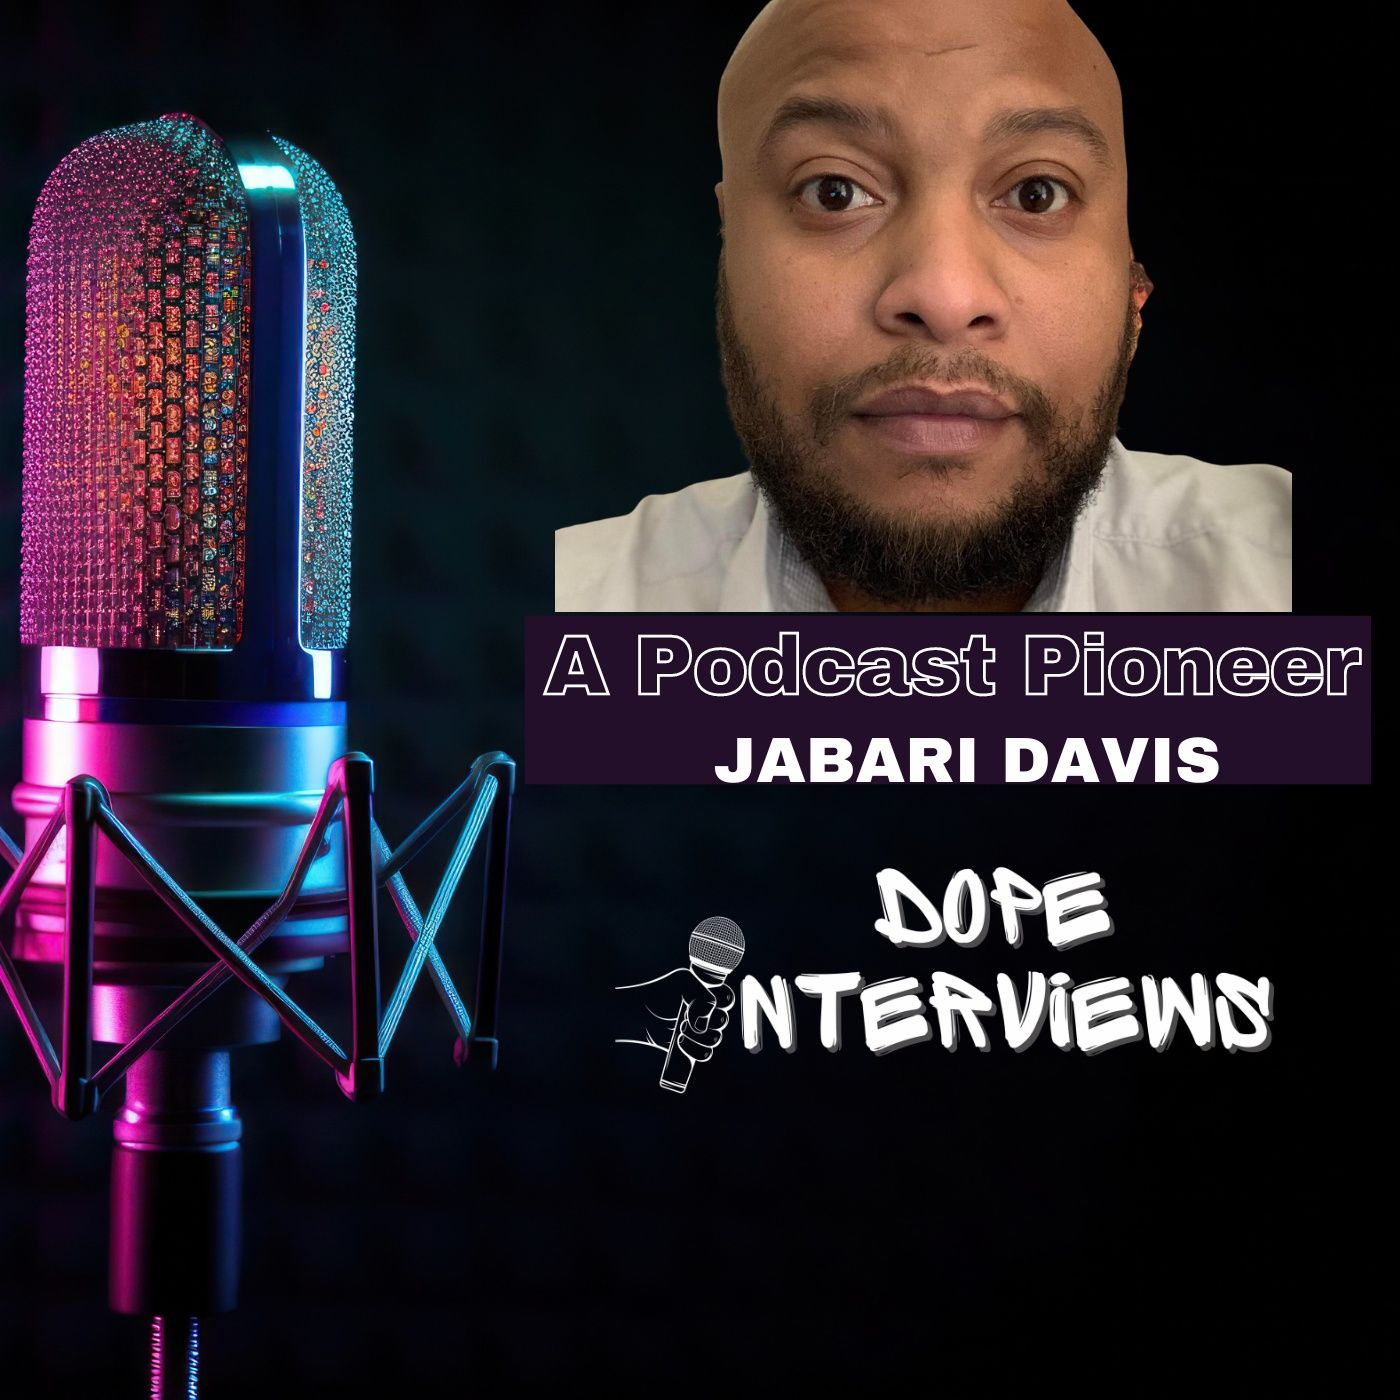 The Journey of a Podcast Pioneer: Behind the scenes with iHeart Radio's Jabari Davis